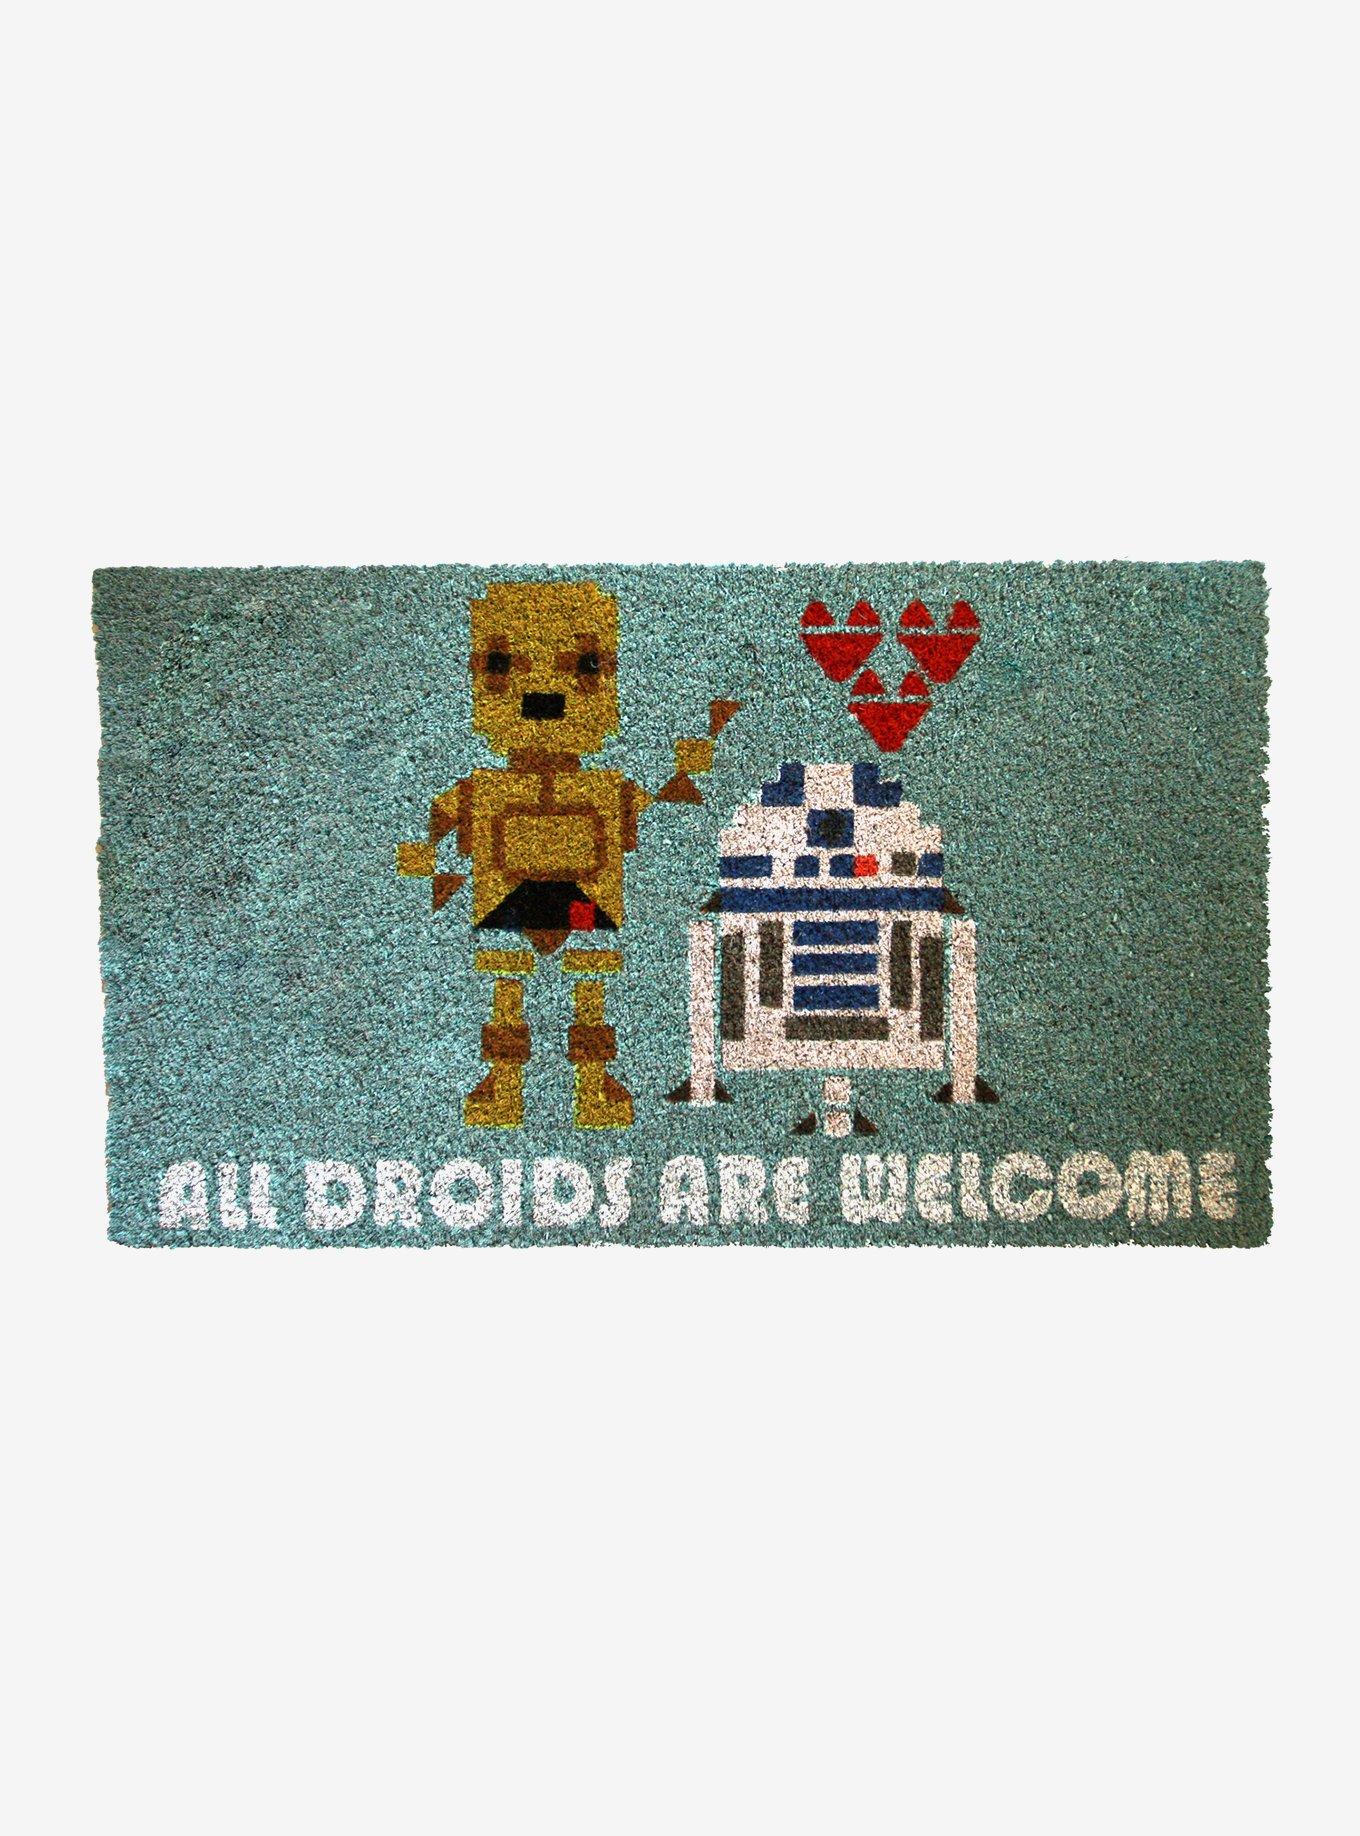 Star Wars All Droids Are Welcome Doormat